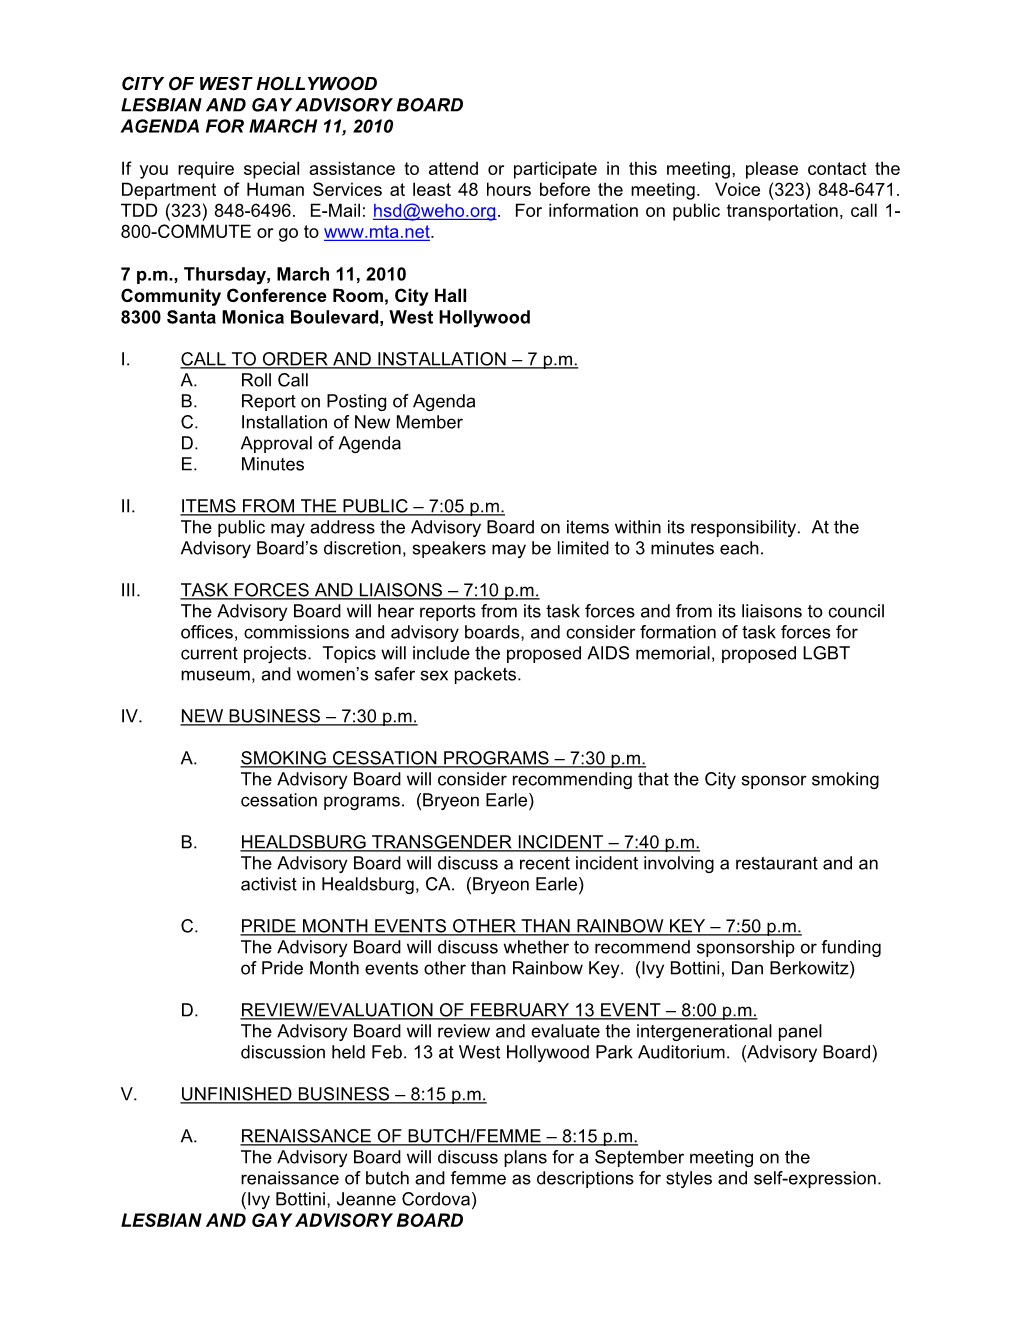 City of West Hollywood Lesbian and Gay Advisory Board Agenda for March 11, 2010